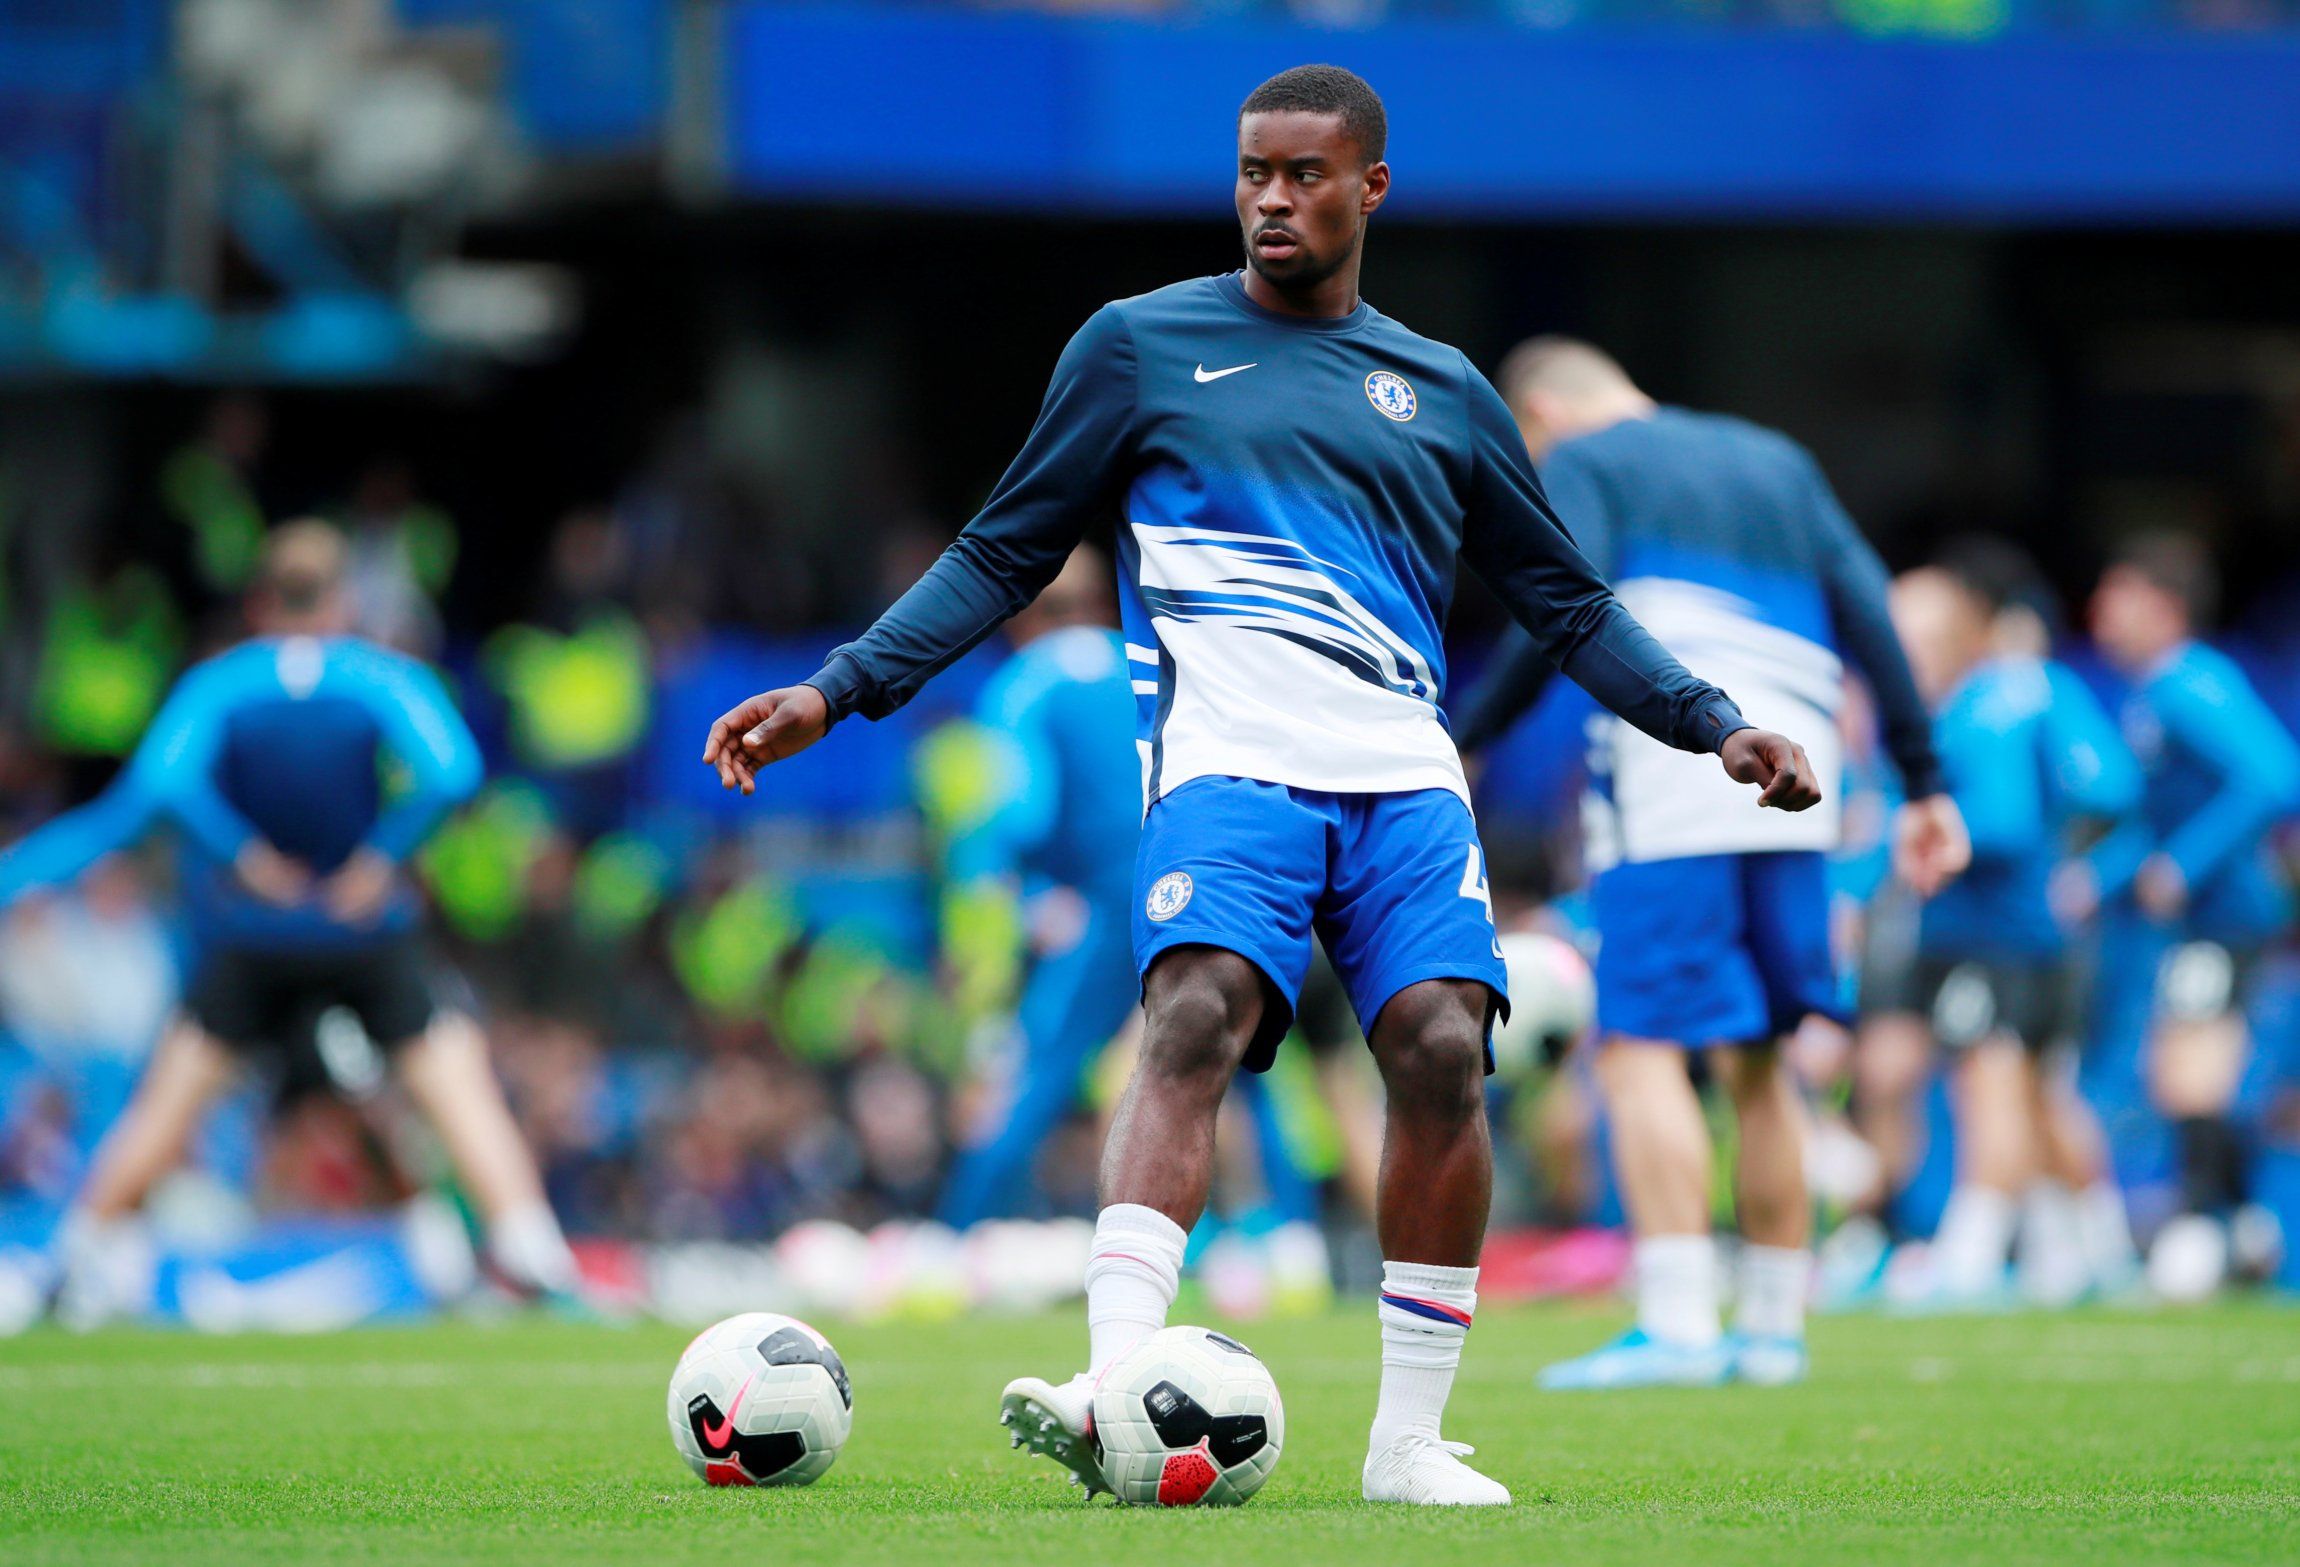 chelsea youngster marc guehi in warm-up against brighton premier league